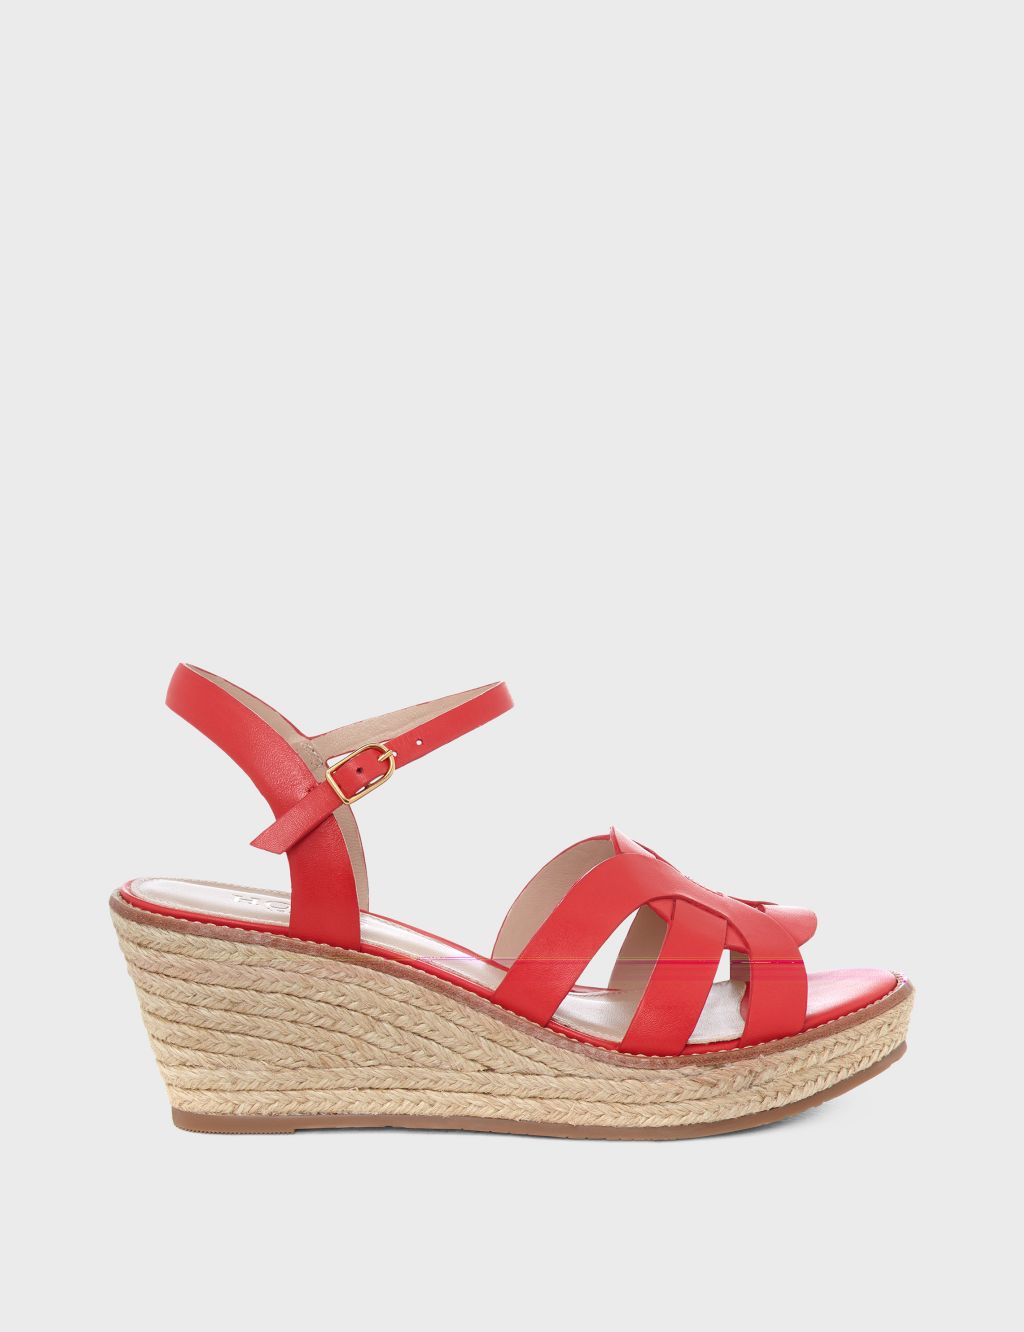 Leather Ankle Strap Wedge Espadrilles image 1